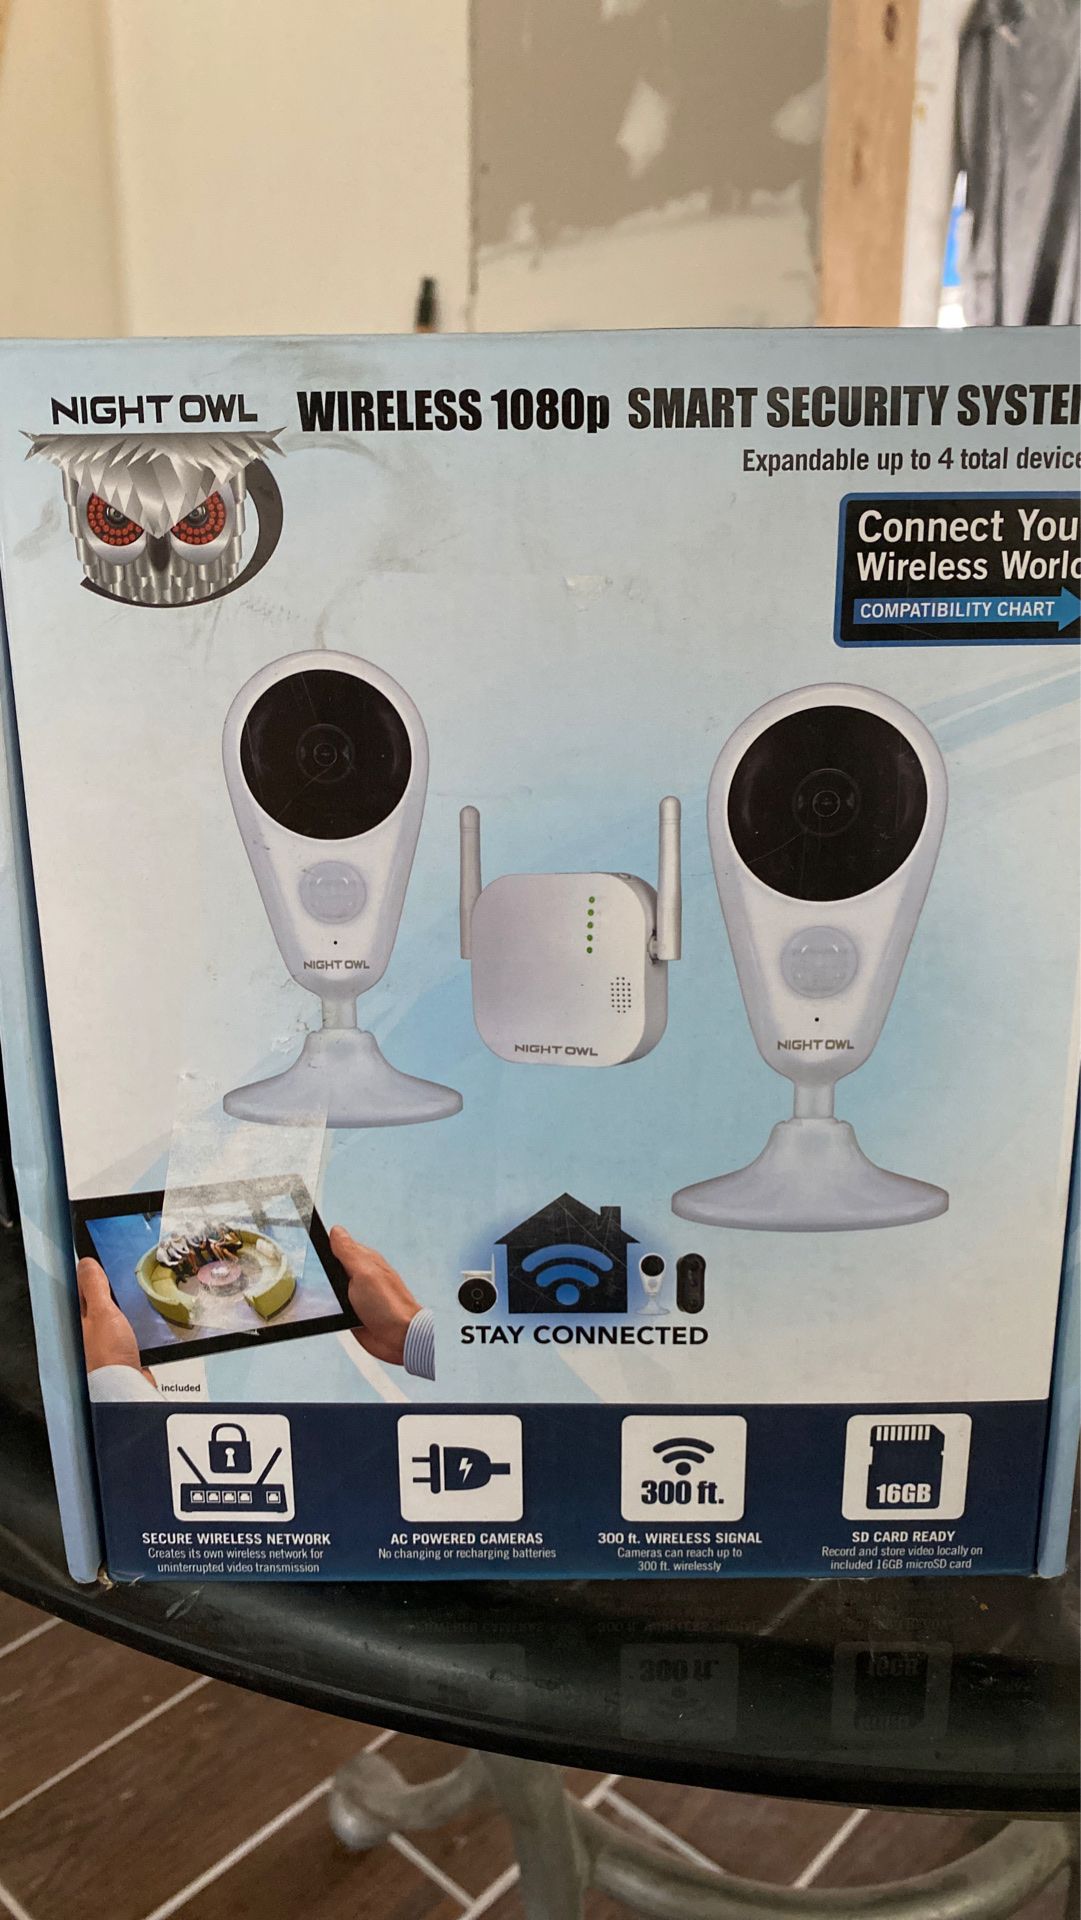 Wireless 1080p smart security system